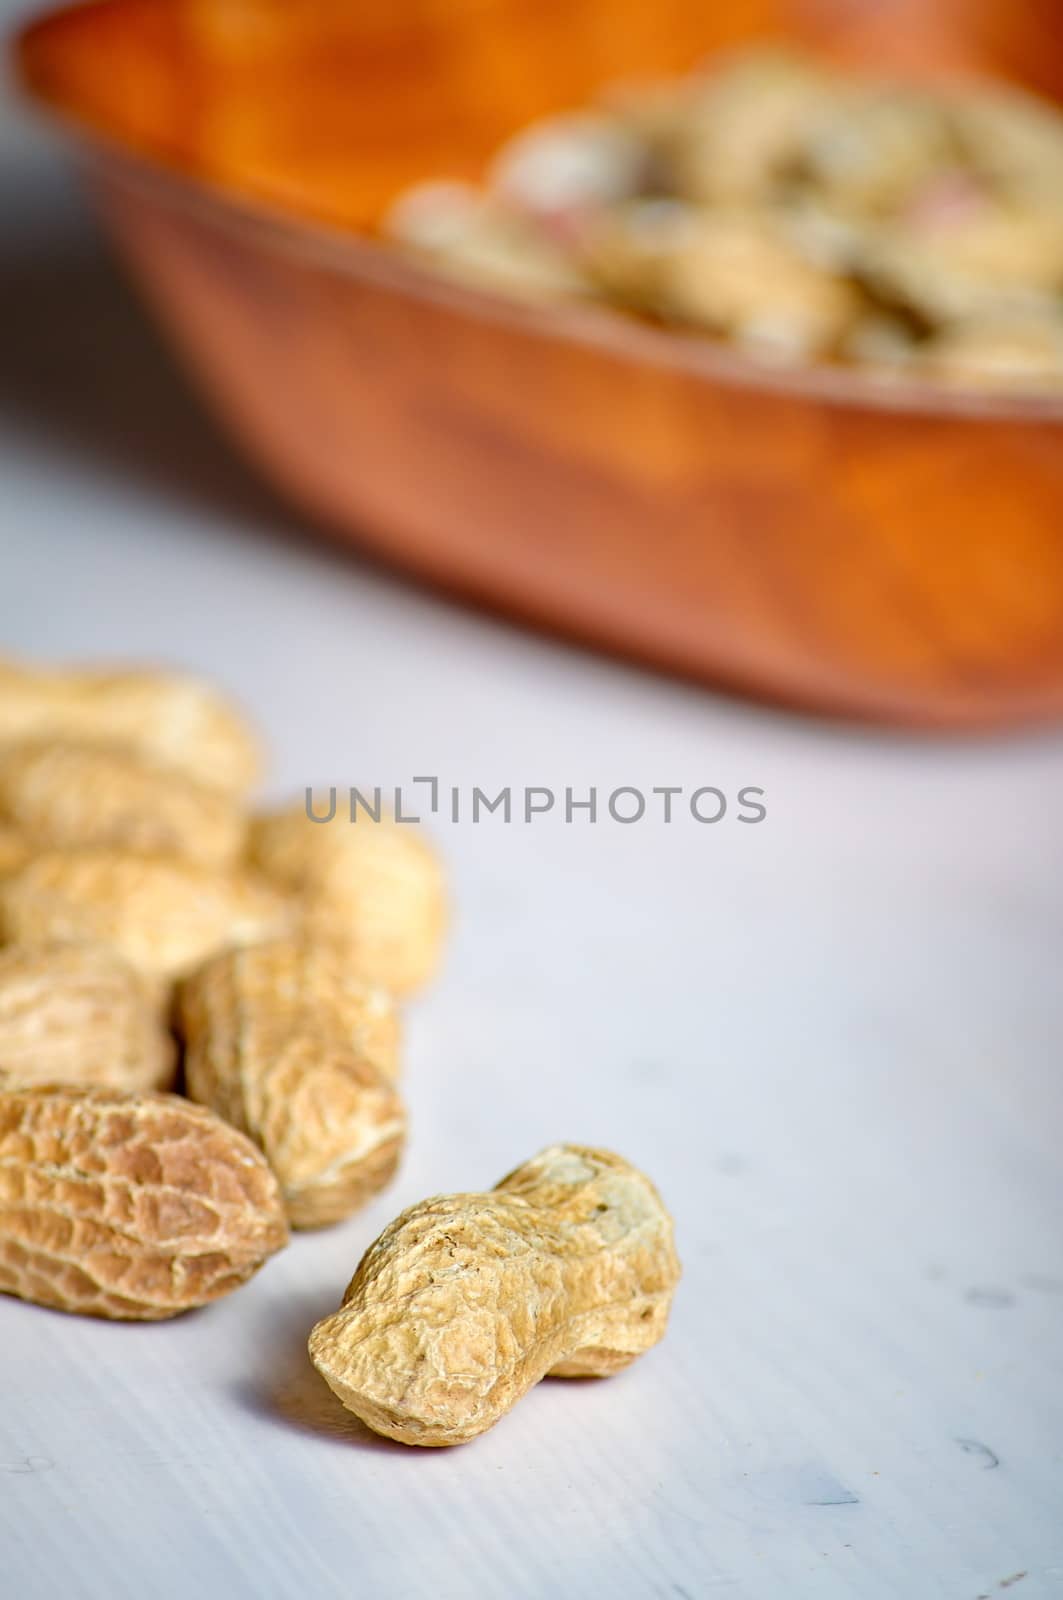 Peanuts in a brown bowl by anderm